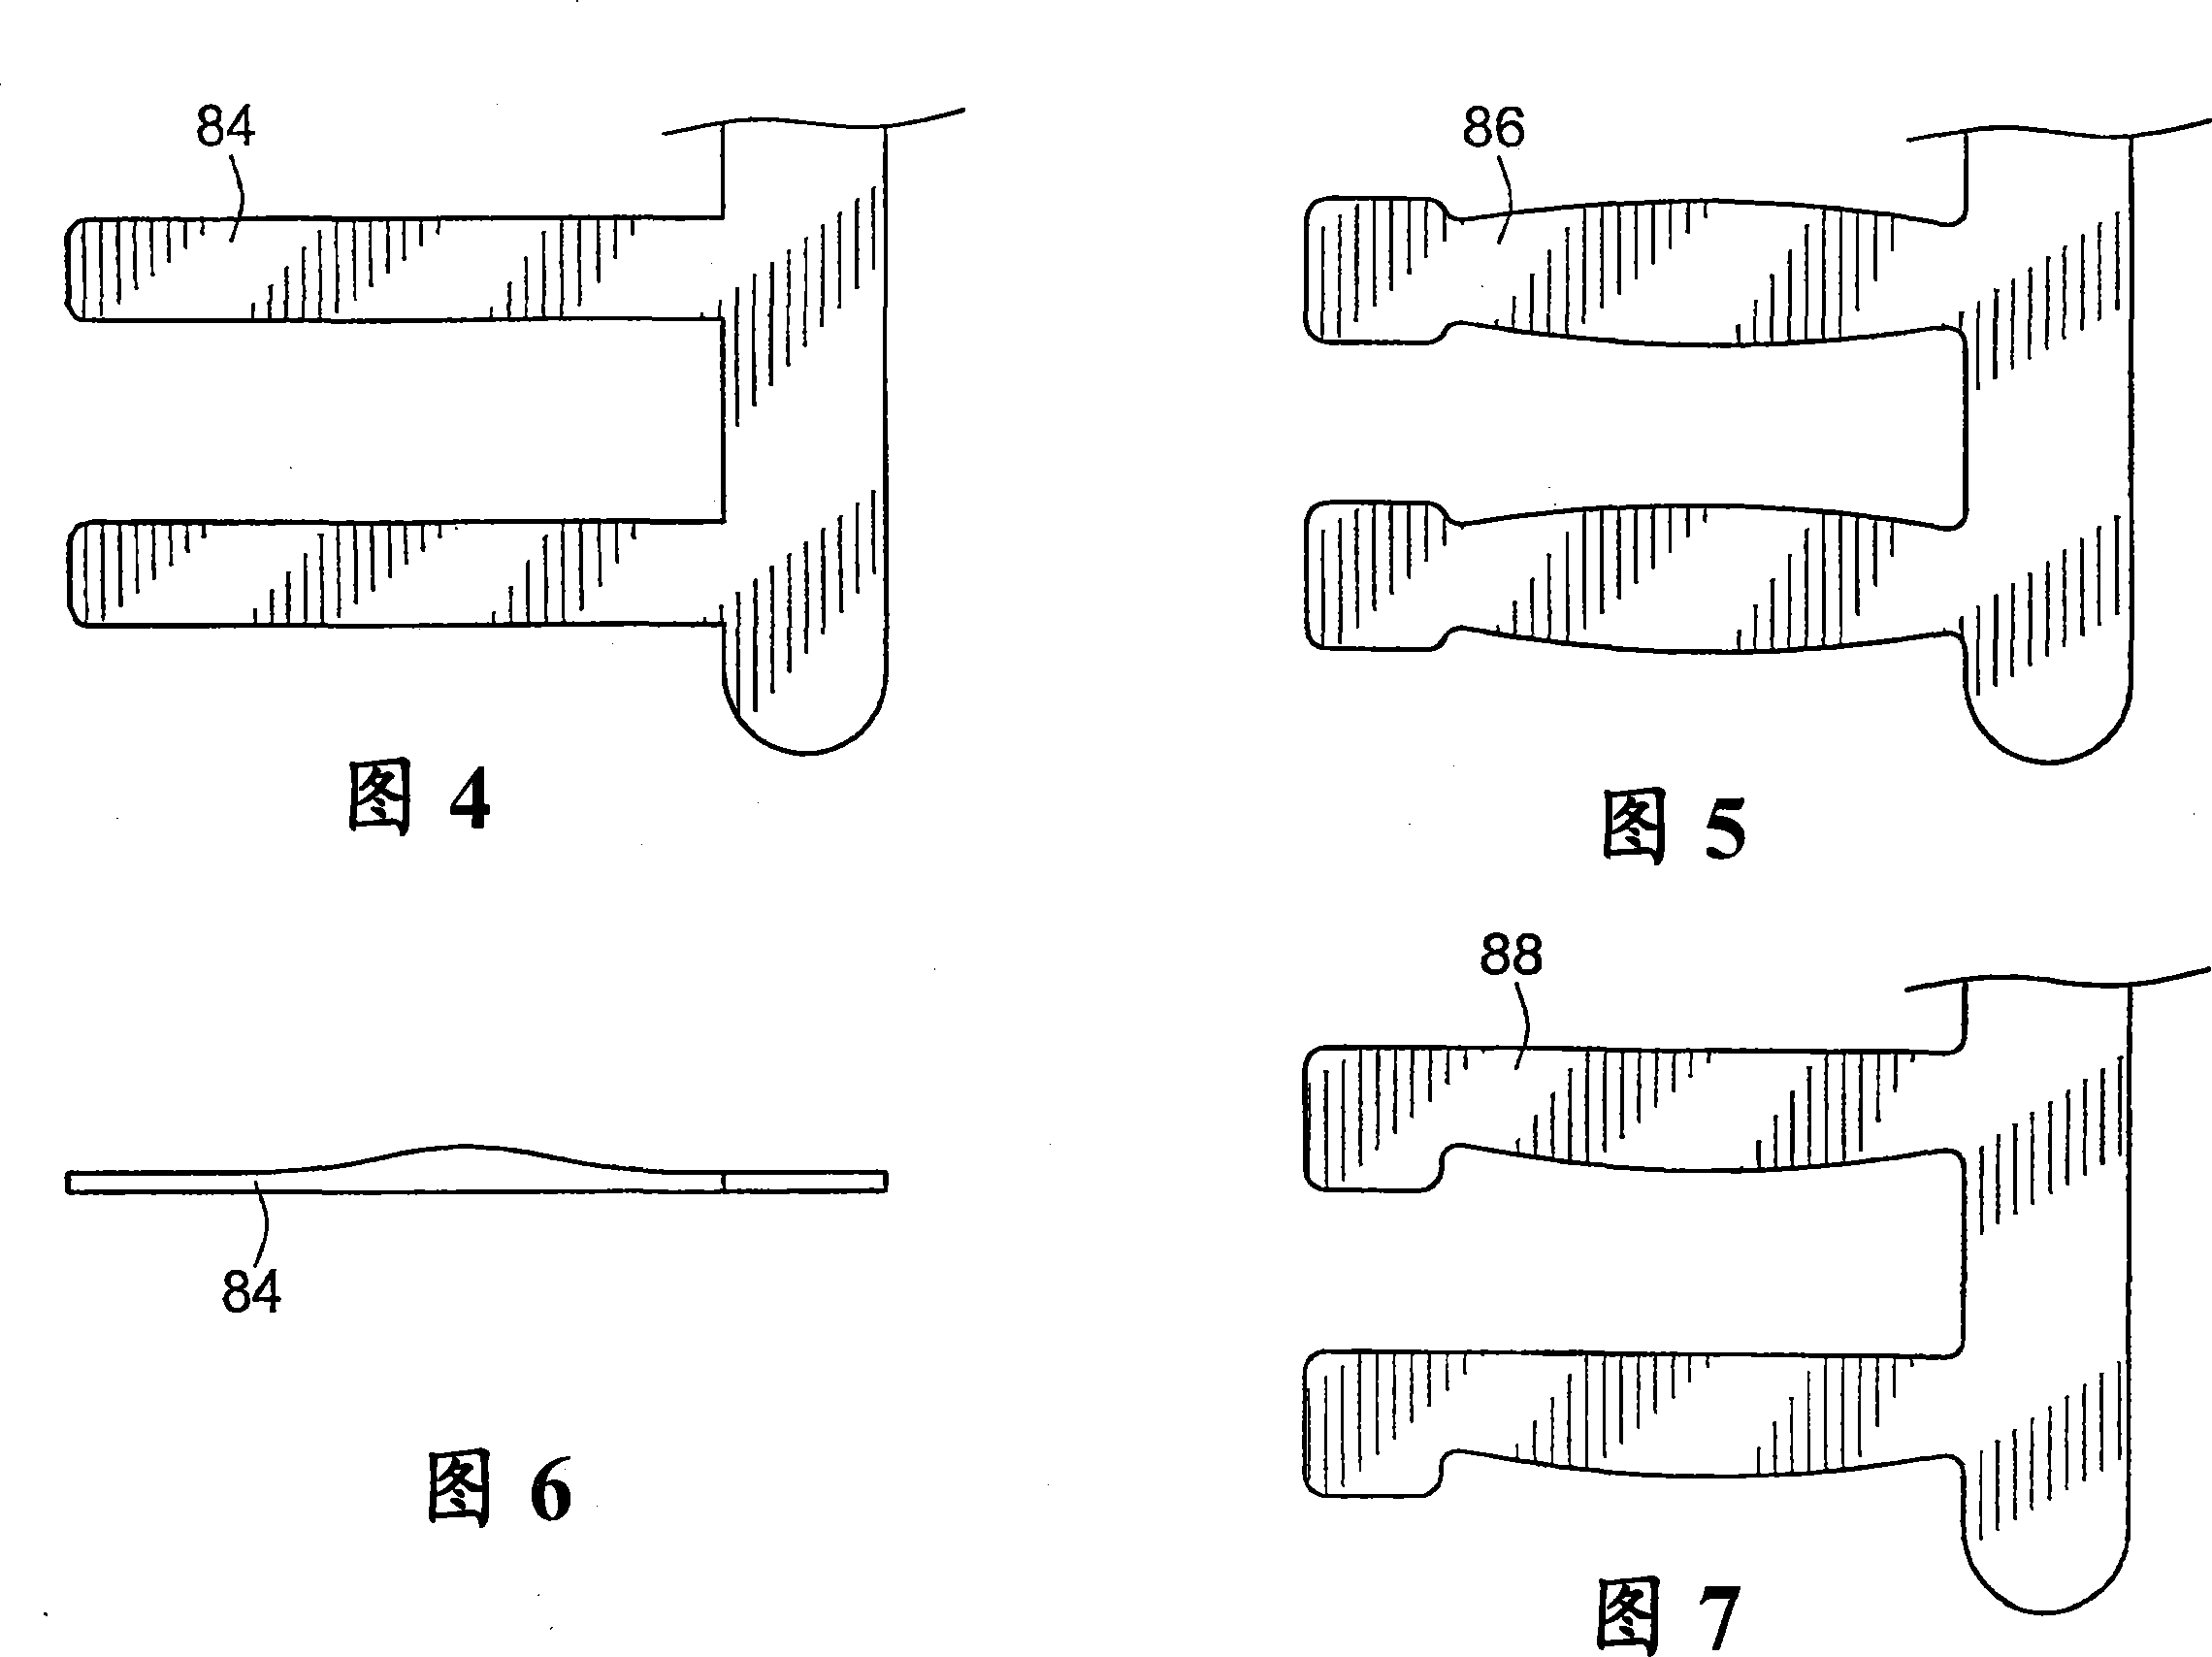 Binding element and plurality of binding elements particularly suited for automated processes